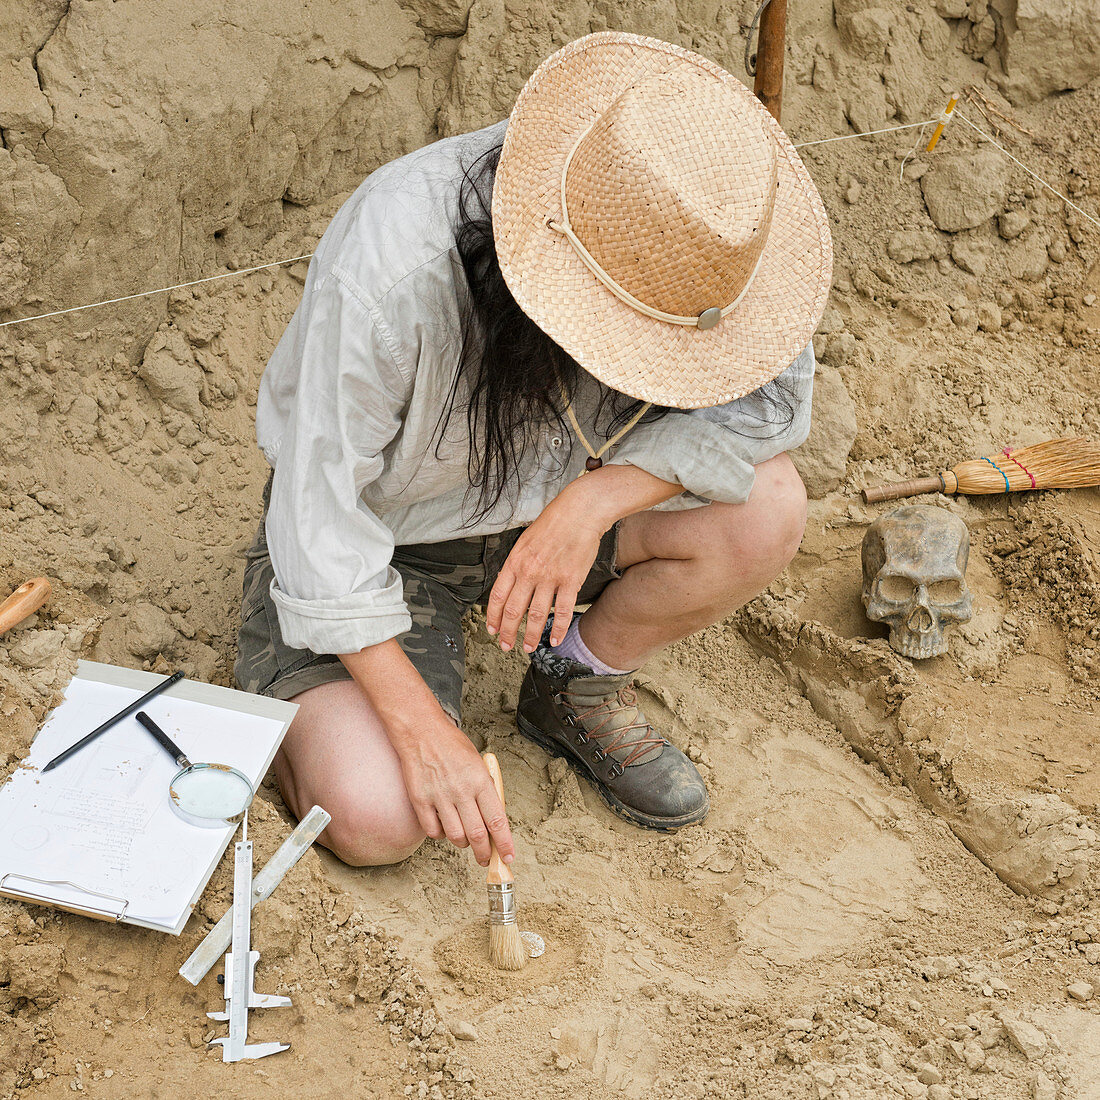 Archaeologist excavating a coin